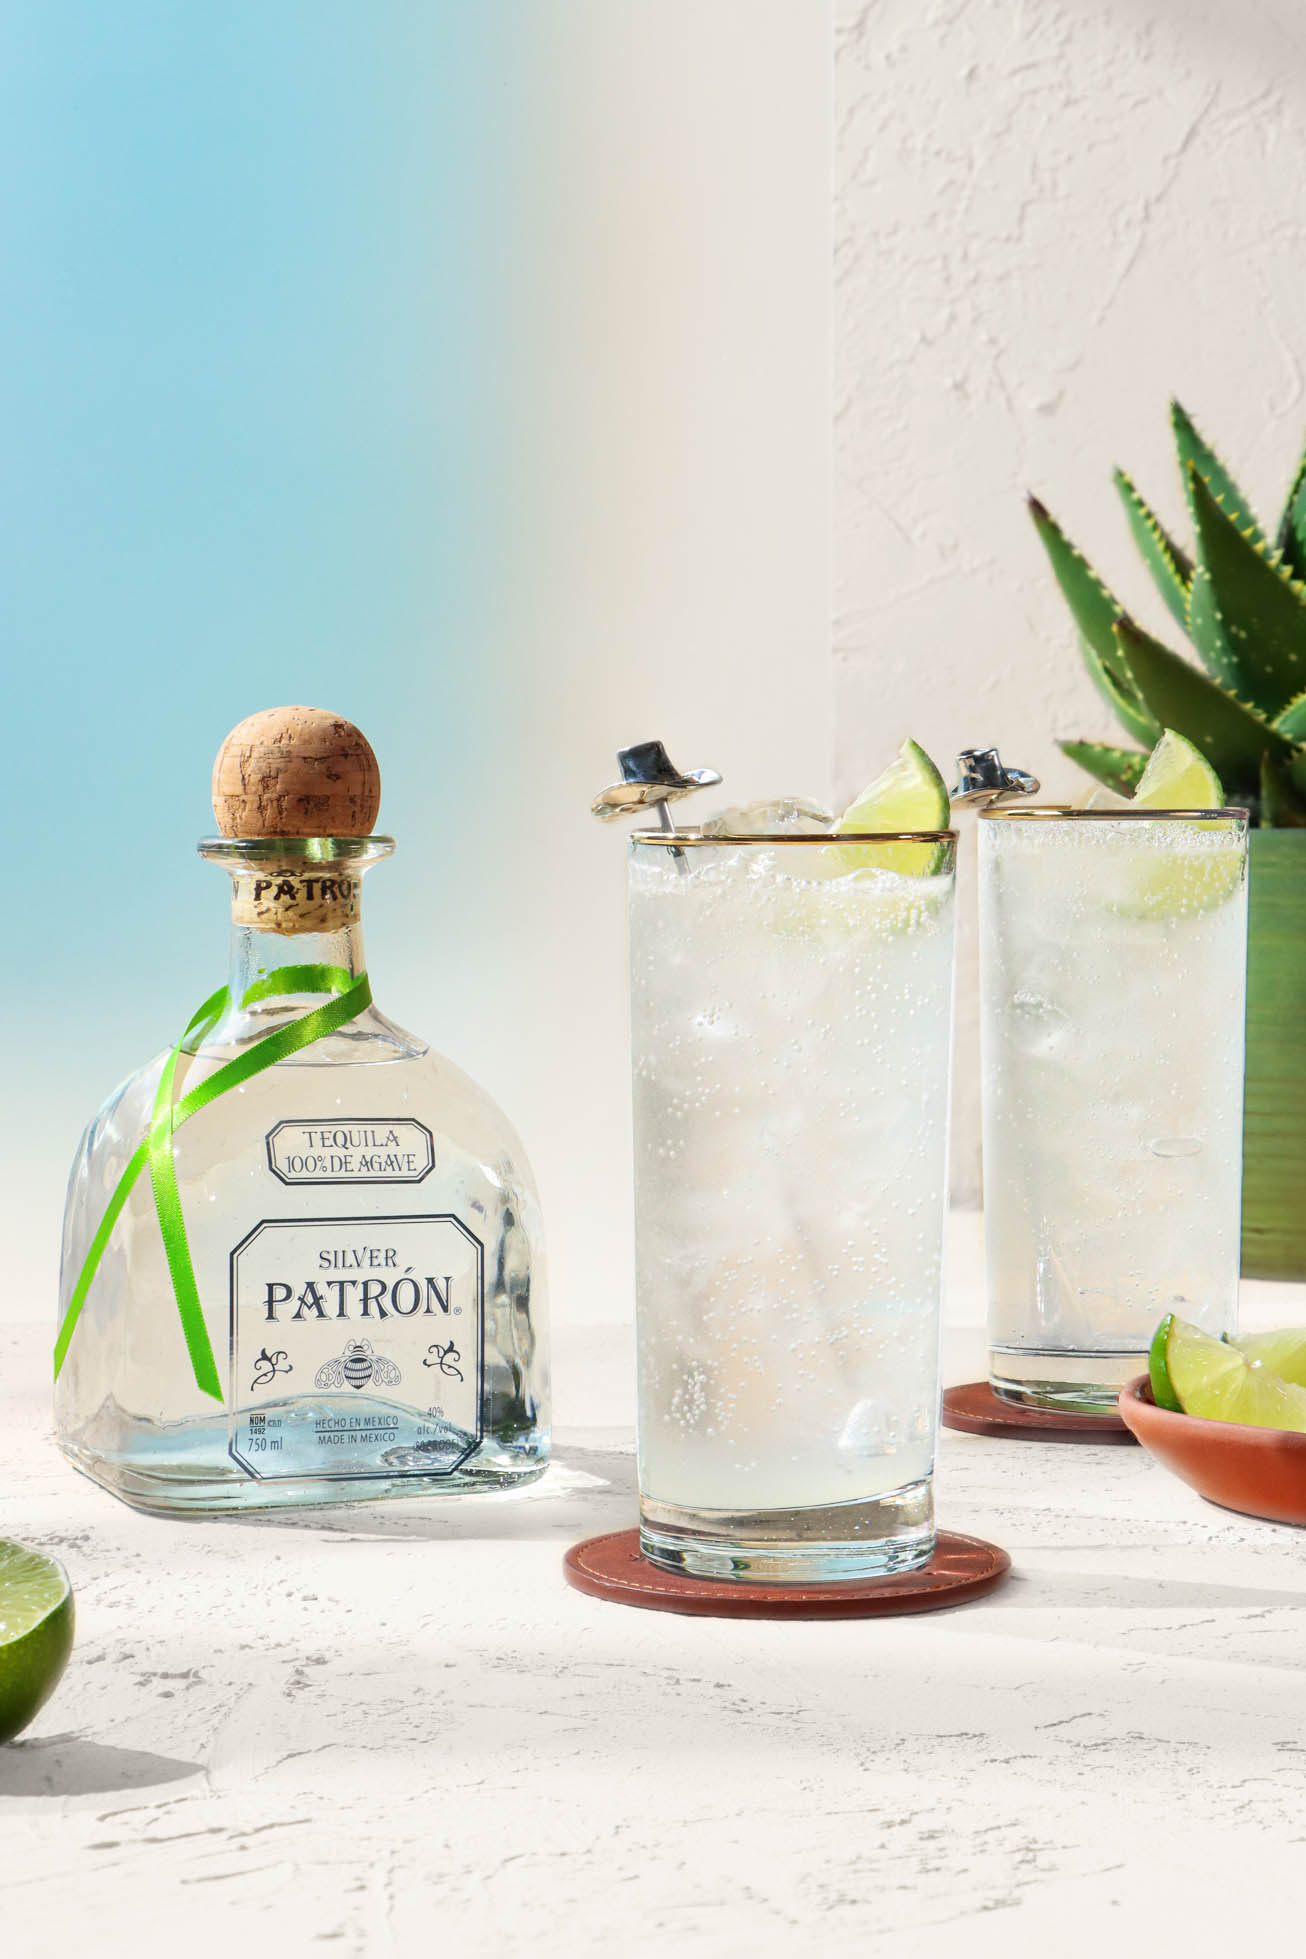 A bottle of PATRÓN Silver and 2 glasses of PATRÓN Ranch Water cocktail with cowboy hat stir rods on leather coasters.